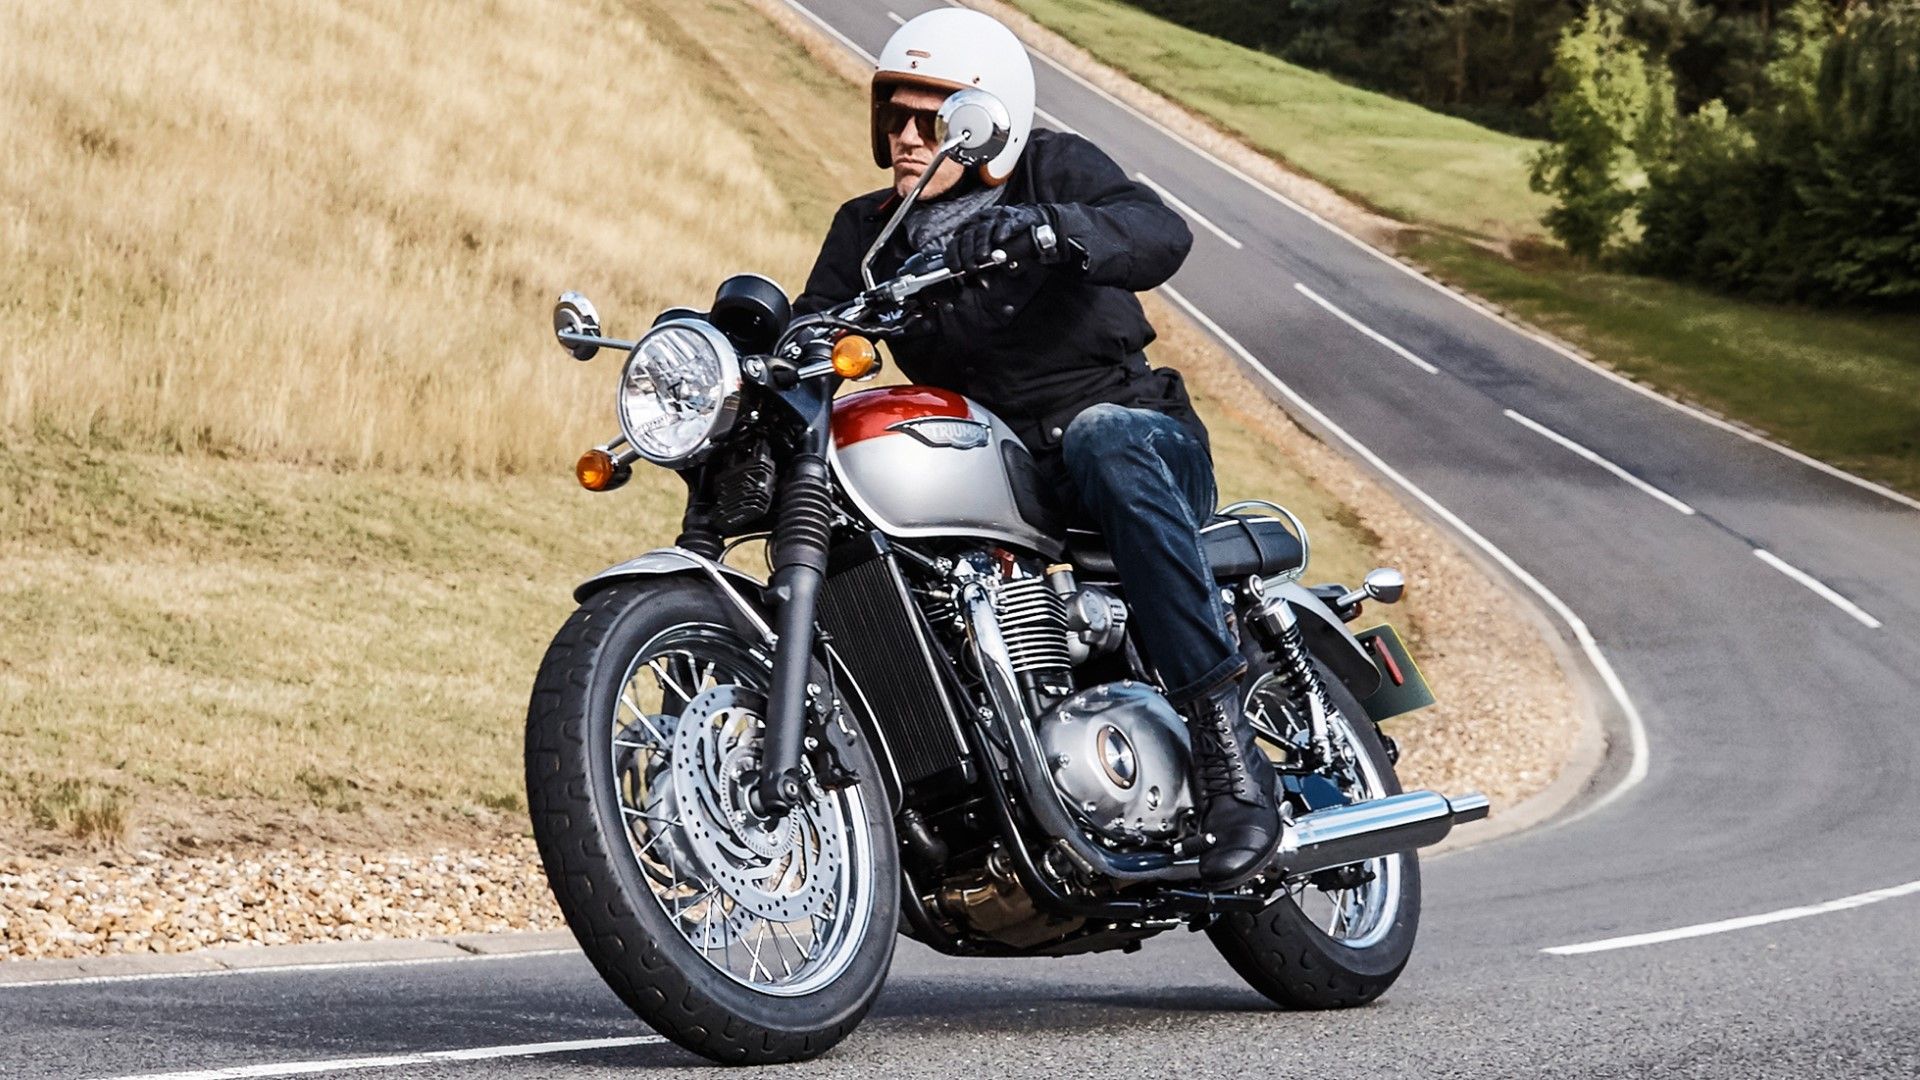 Two-Up Riders: 13 Of The Best Touring Motorcycles For You And Your Pillion